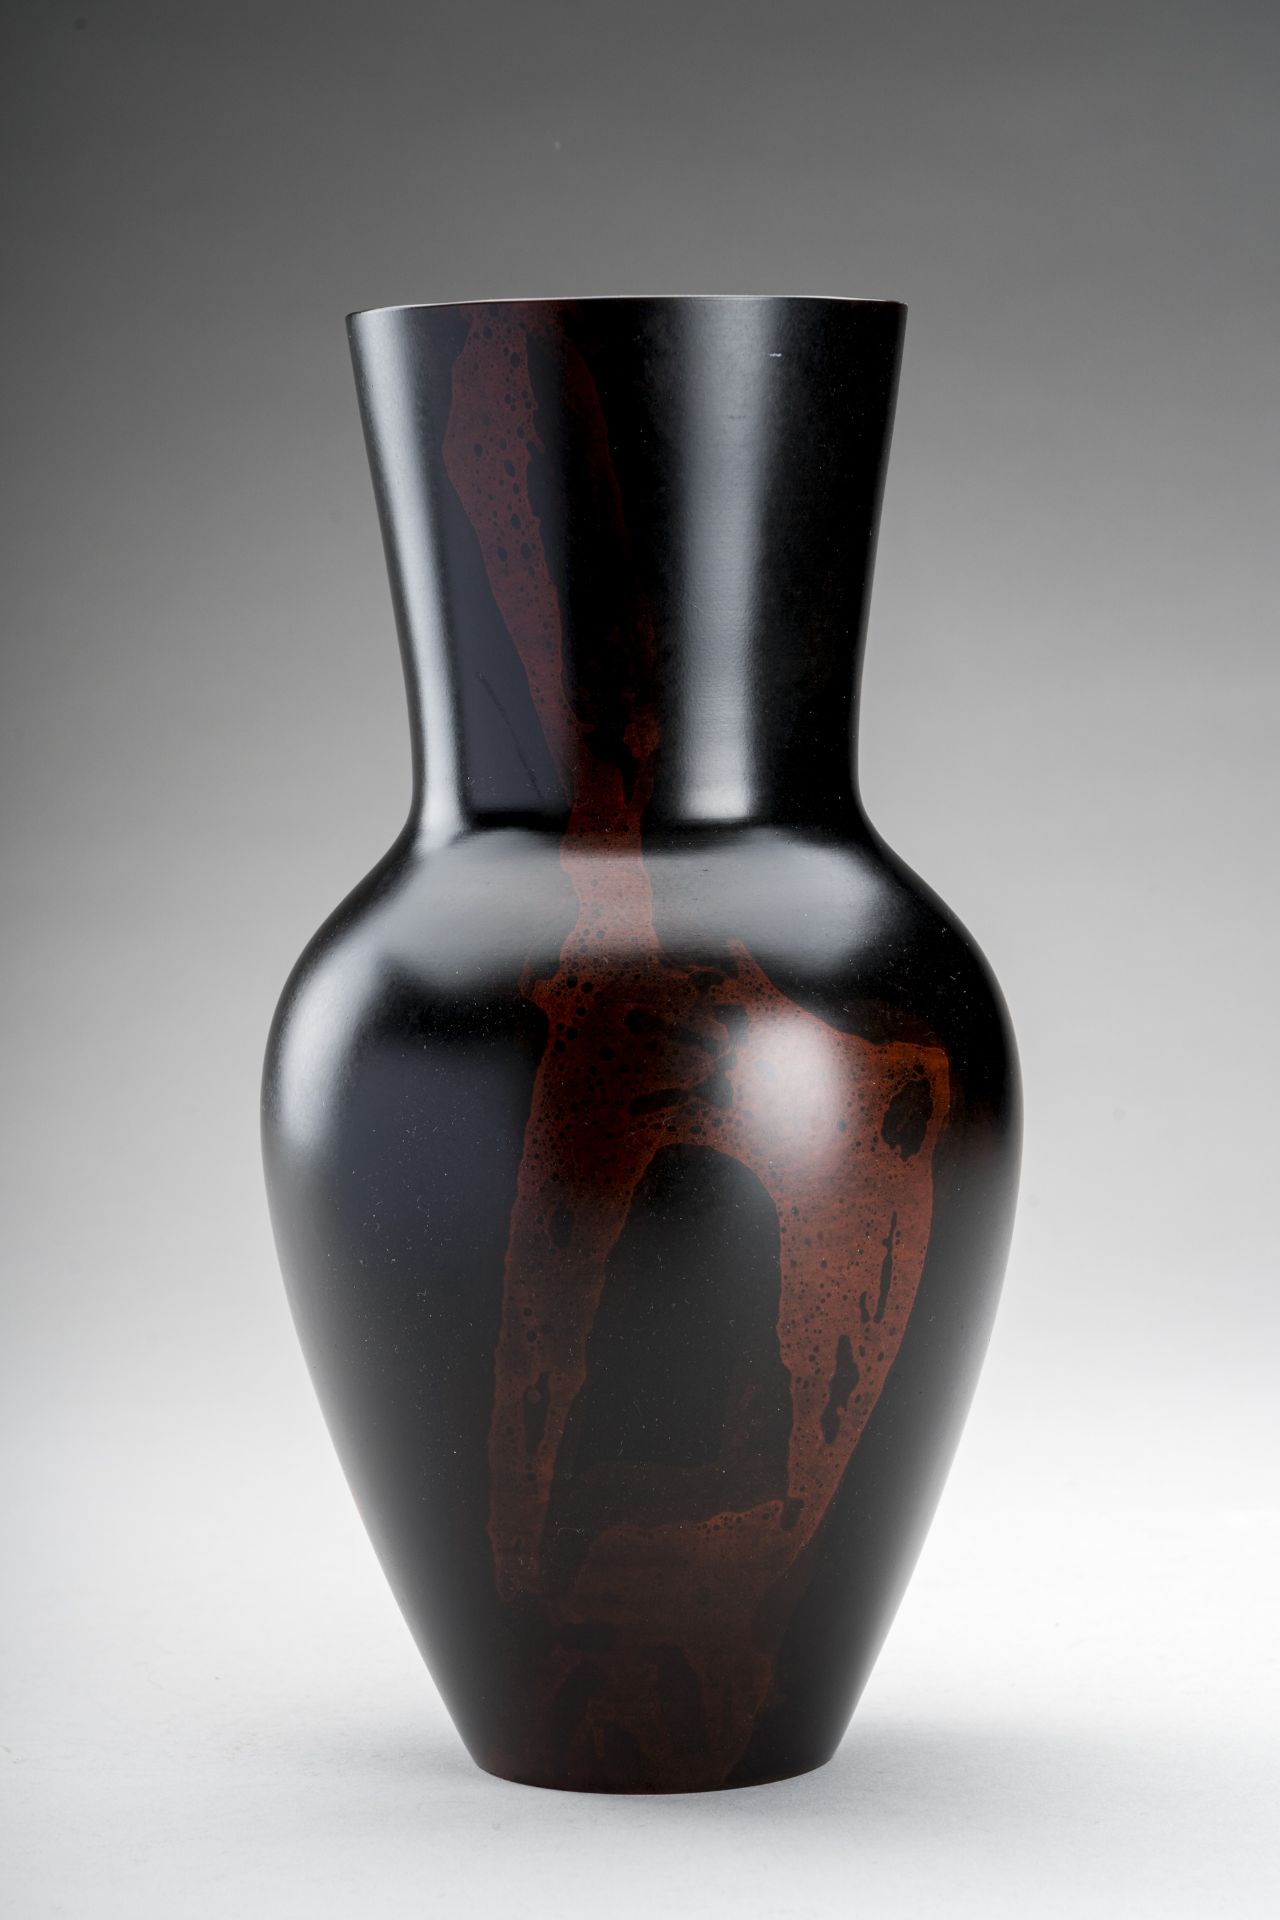 A FINE PATINATED BRONZE VASE WITH RED SPLASHES